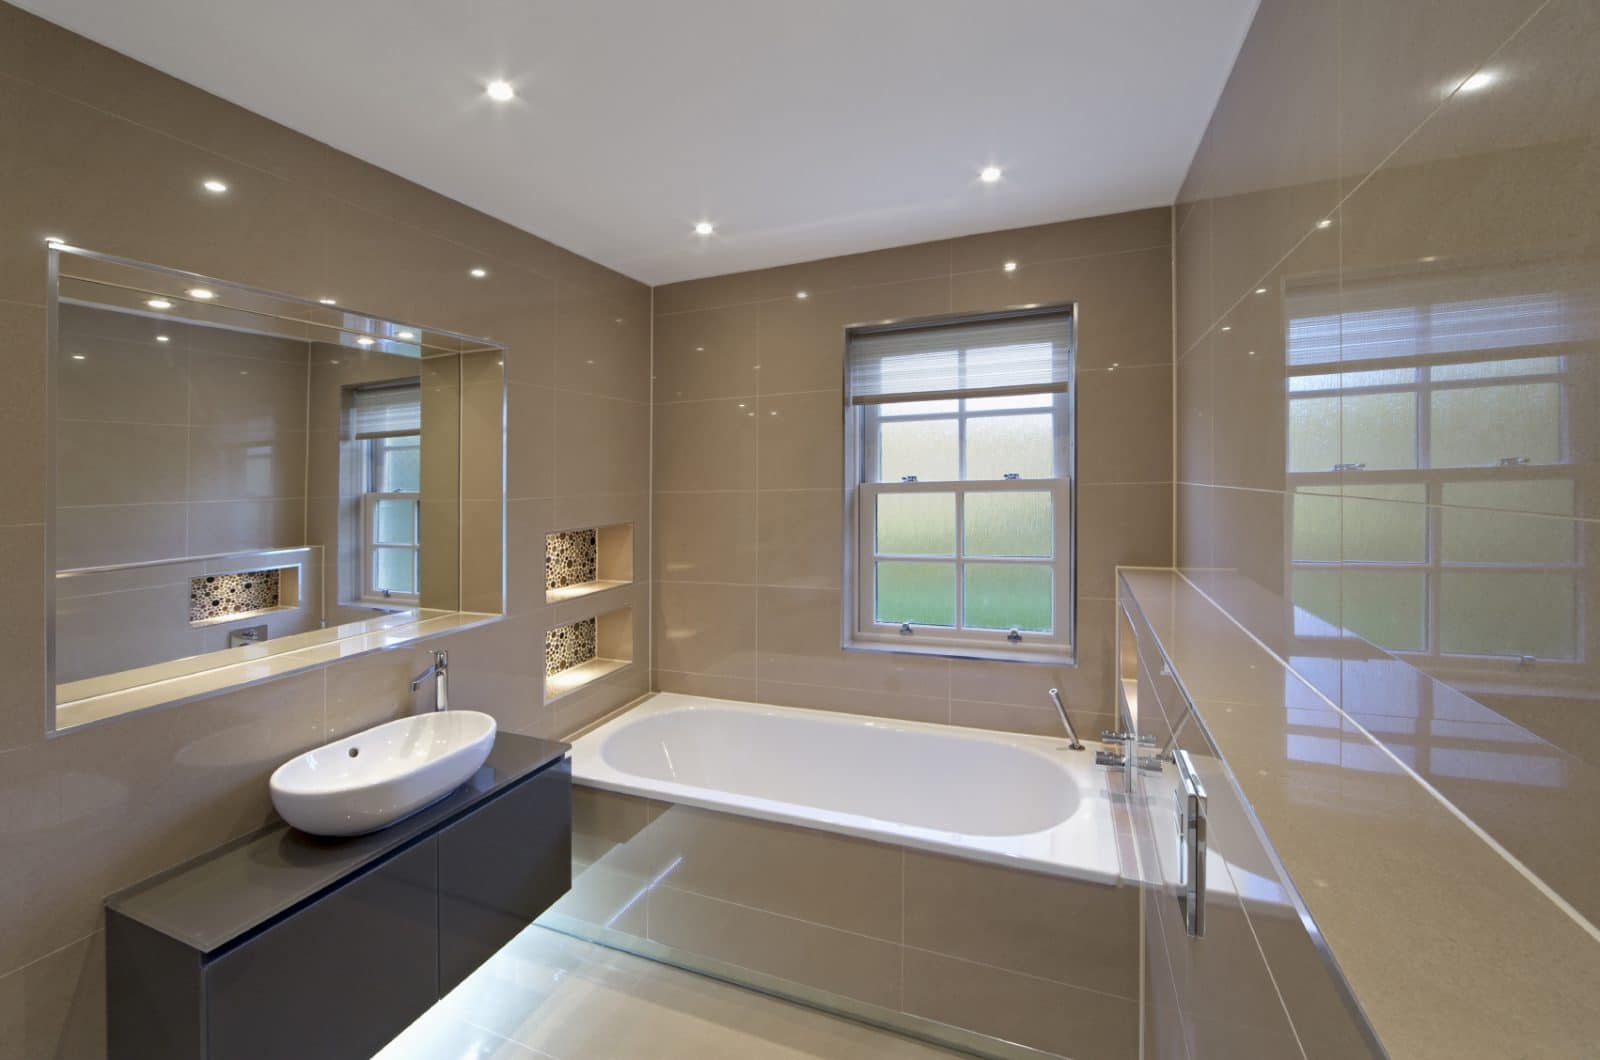 Bathroom Fitting Costs Homeforce, Cost Of Installing A Bathroom Suite